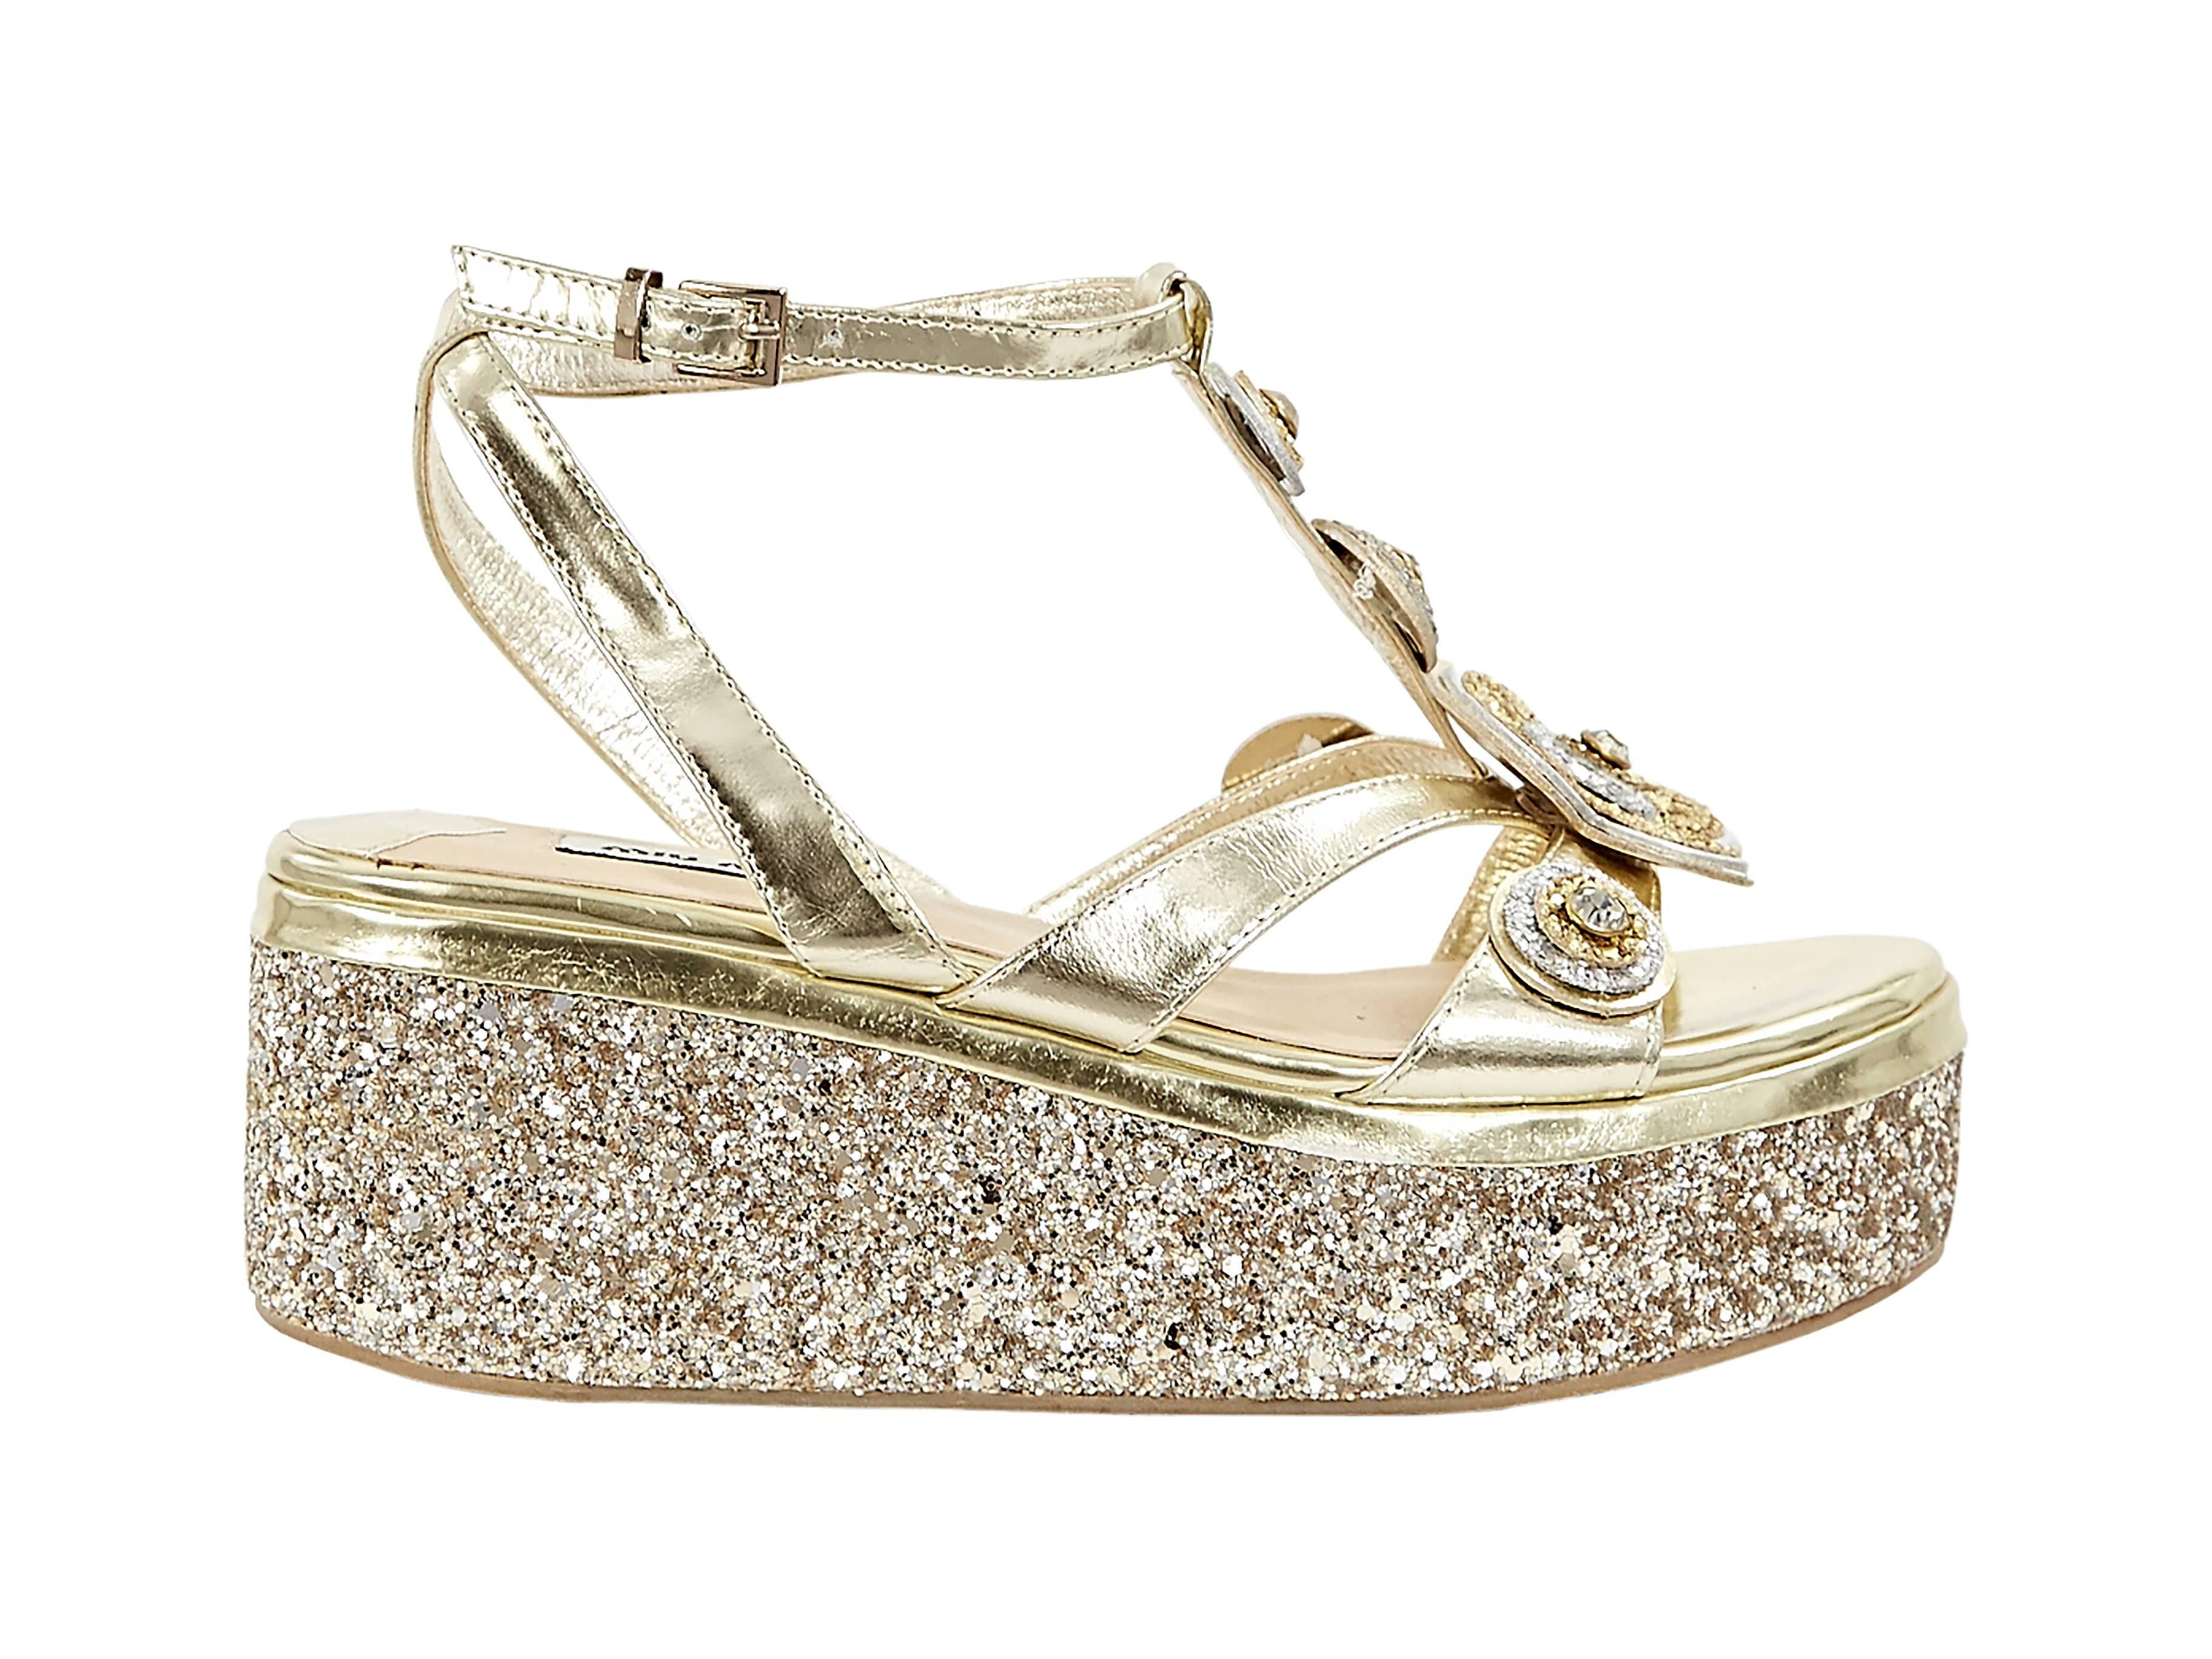 Gold leather and glittered wedge sandals by Miu Miu.  Adjustable ankle strap.  T-strap accented with embellished floral and round details.  Open toe.  Glittered platform wedge. 